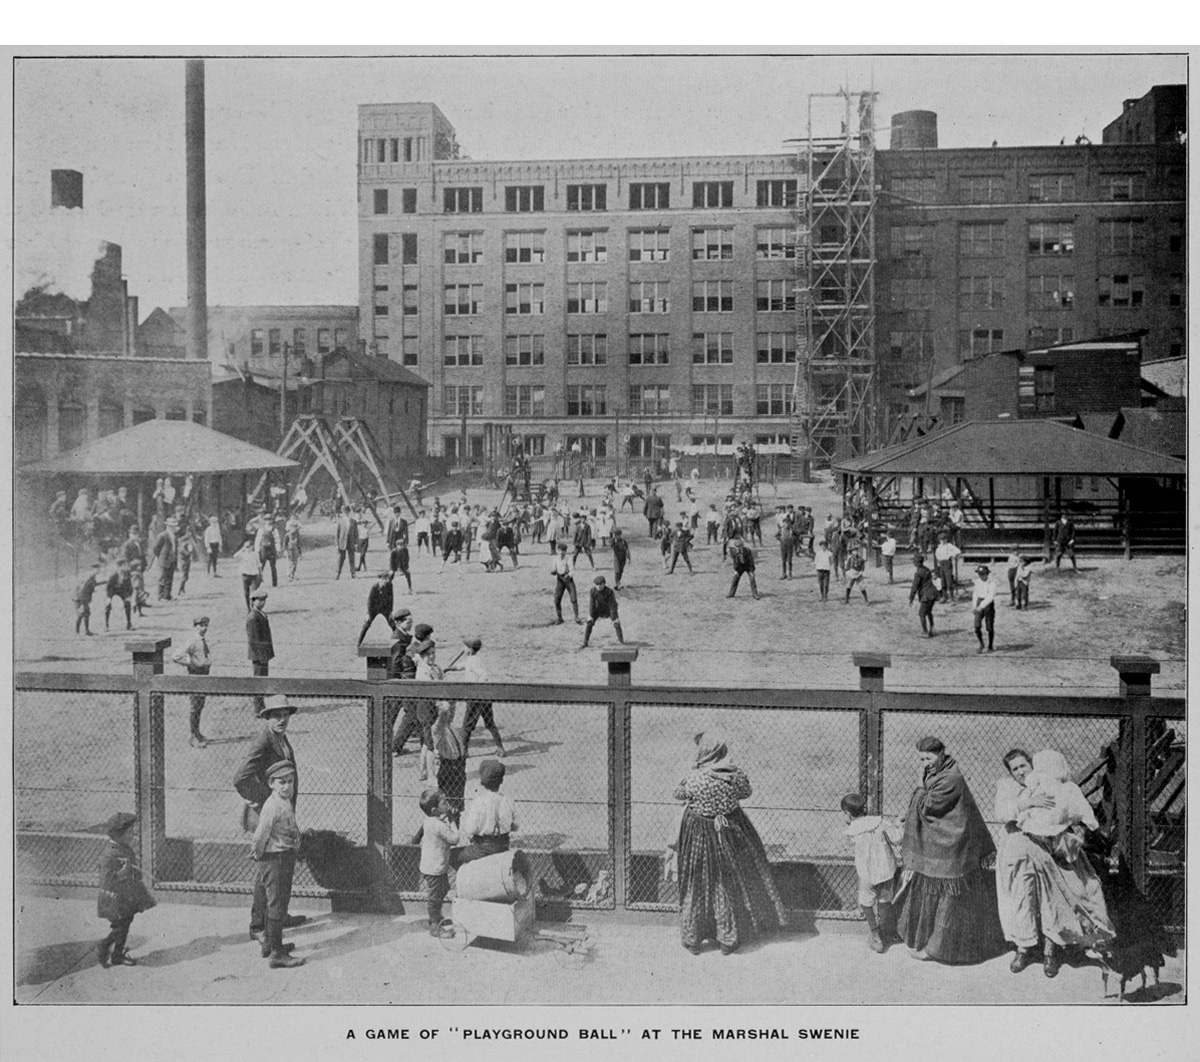 Children play baseball inside a playground with large buildings in the background